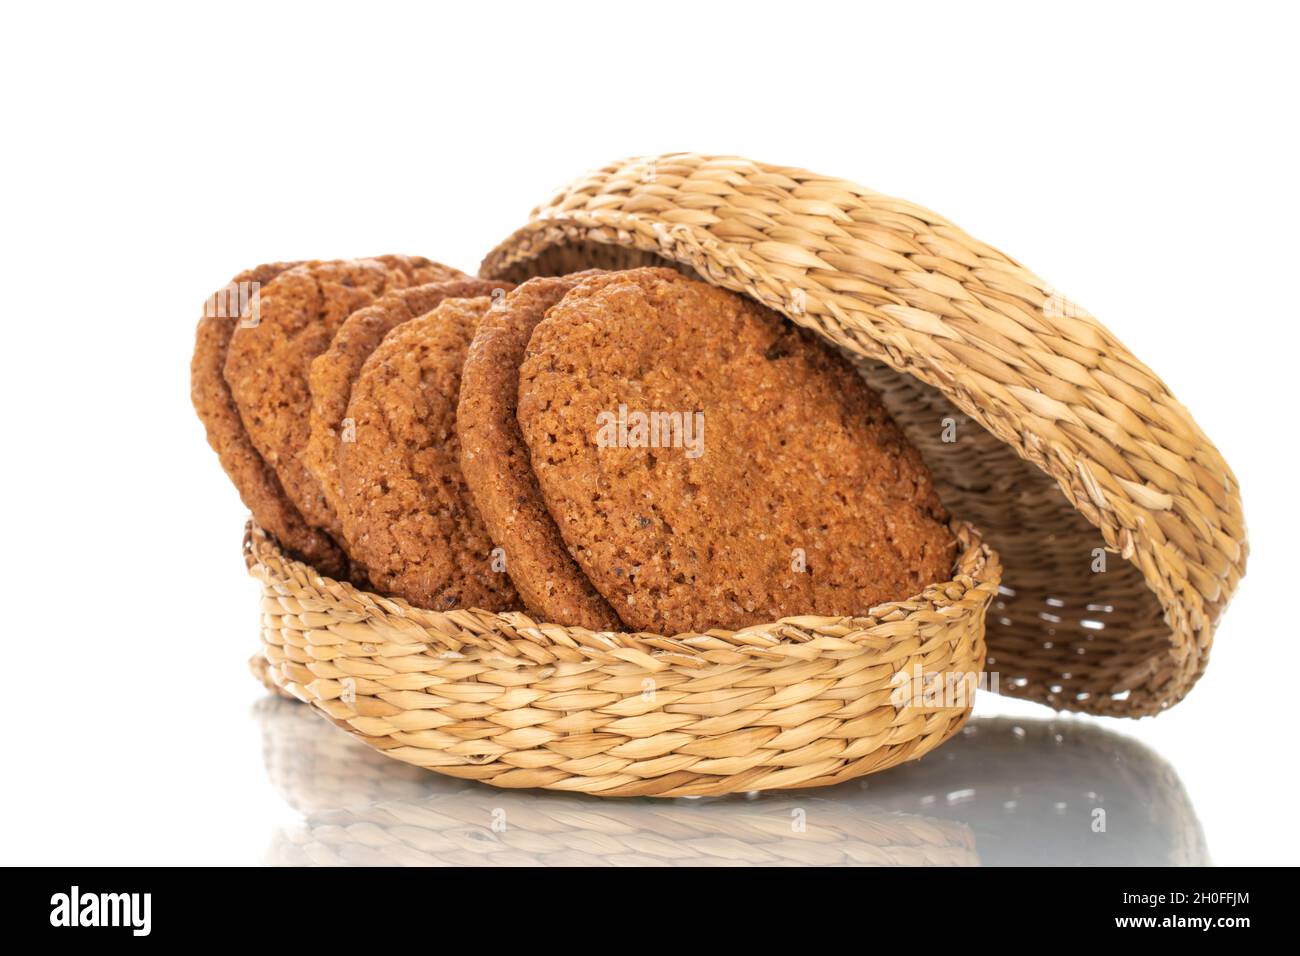 Several fresh oatmeal cookies with straw dishes, close-up, isolated on white. Stock Photo